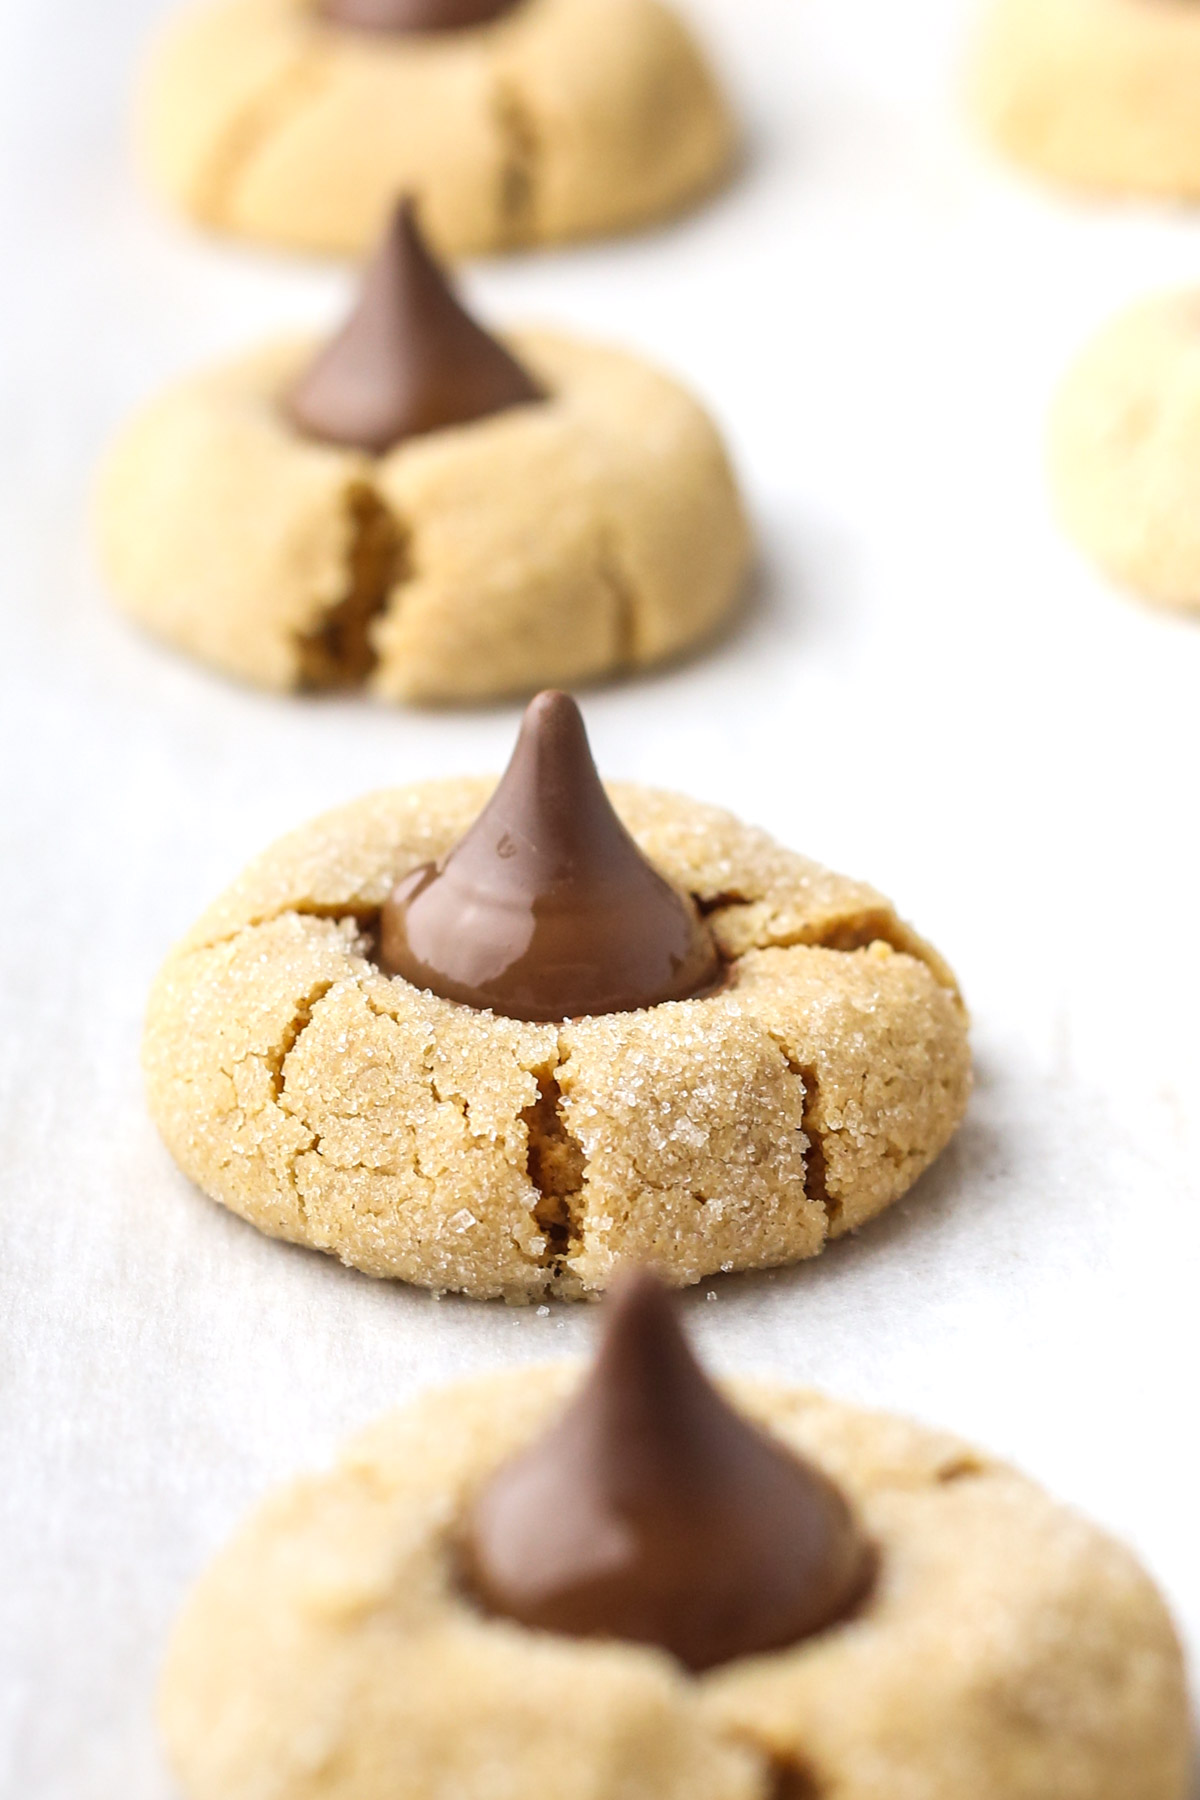 freshly baked 3-ingredient peanut butter blossoms with hershey kisses in the center of the cookies. The cookies are on the baking tray.